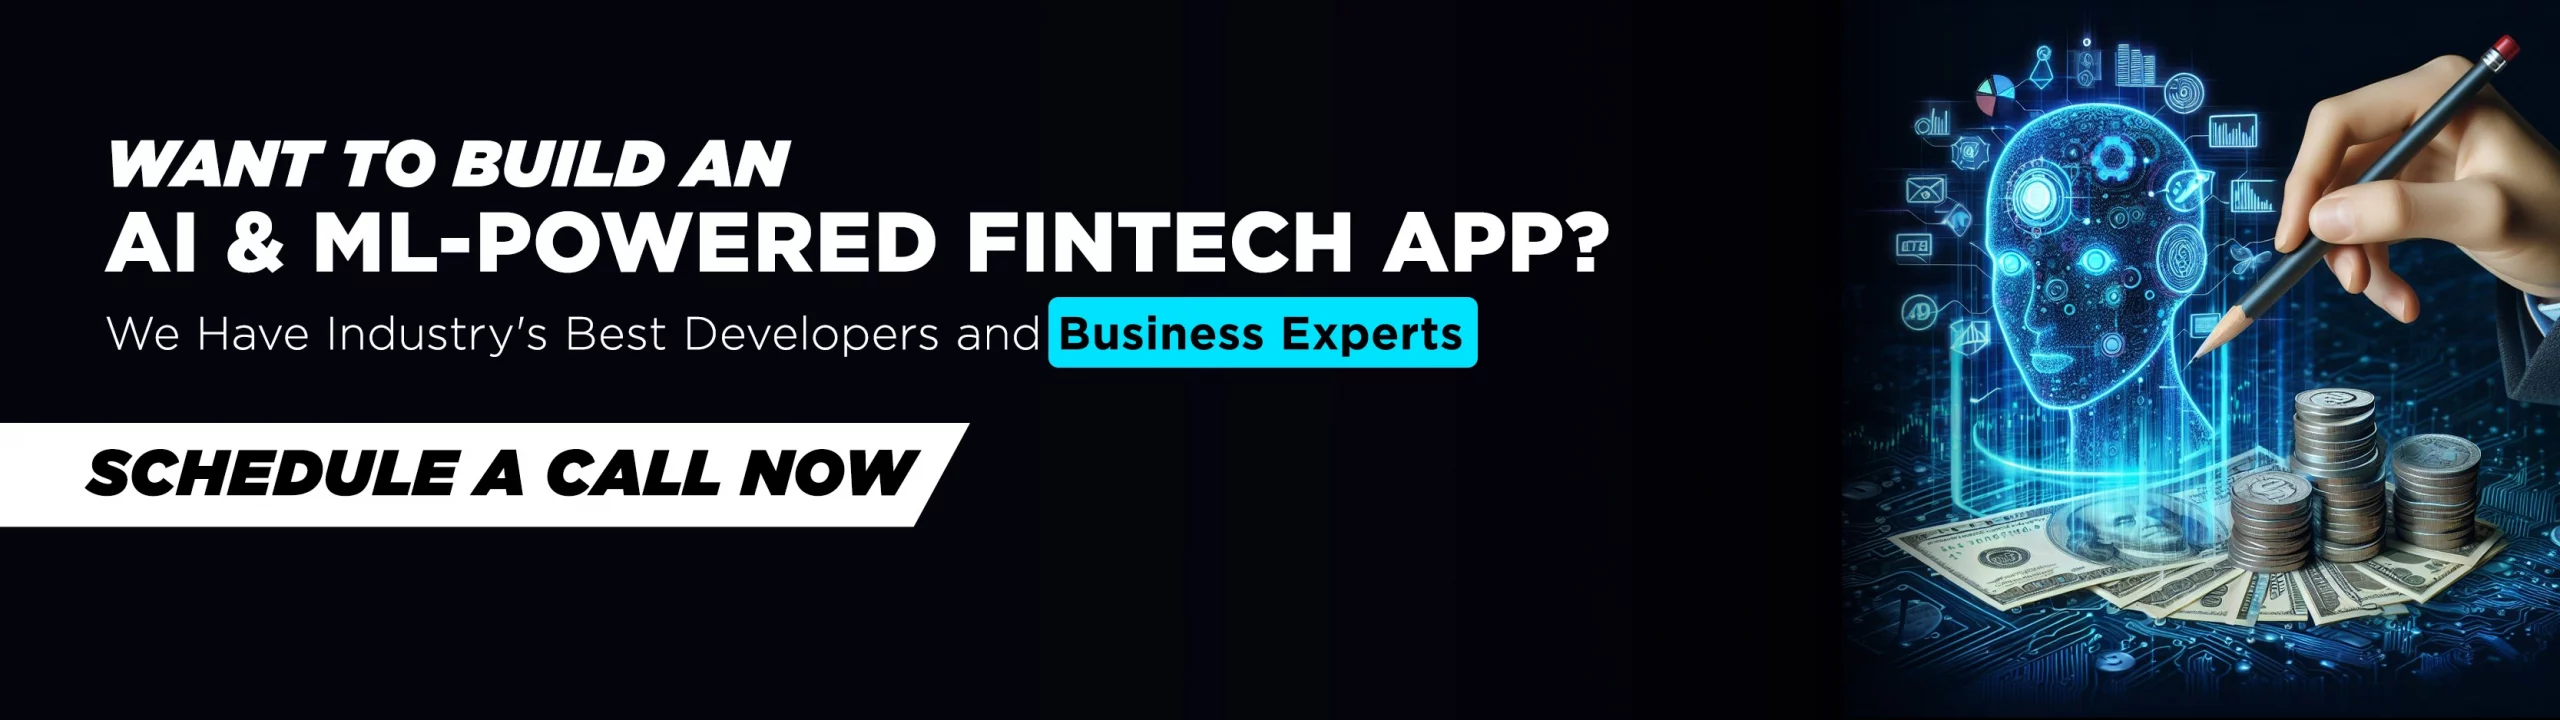 Want to Build AI & ML-Powered Fintech App- Contact Us Now